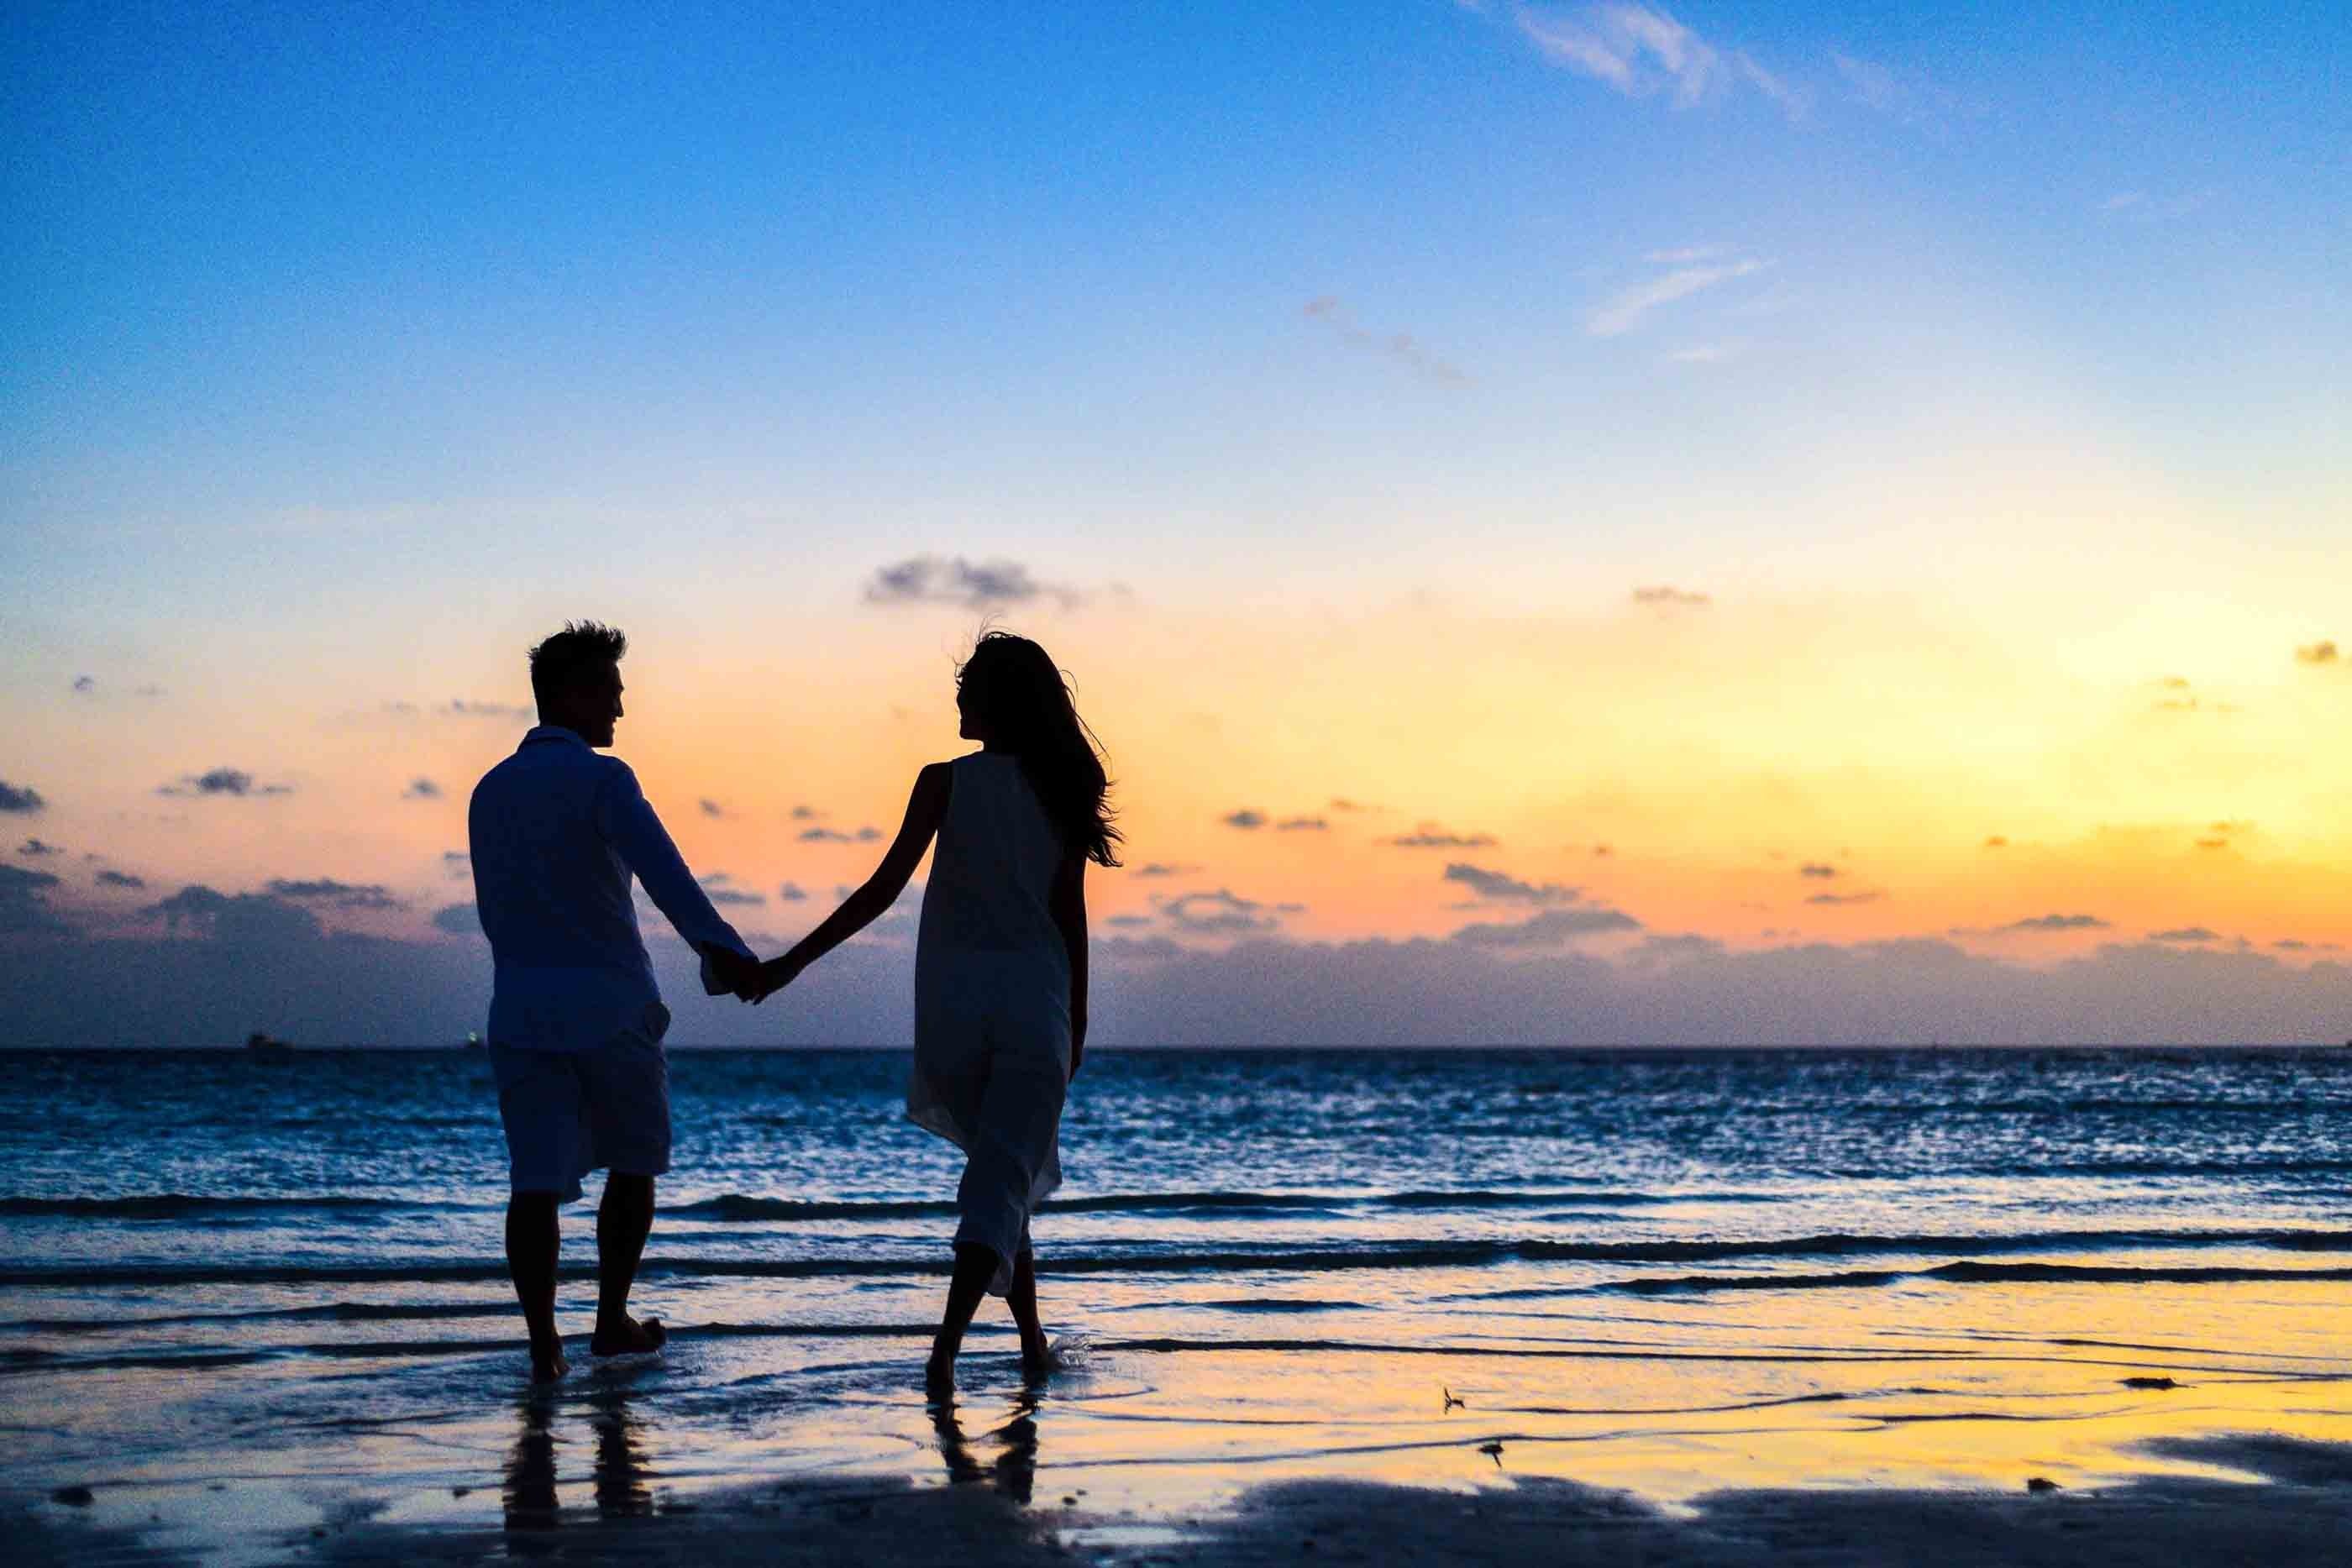 A man and a woman holding hands on seashore during sunrise. | Source: Pexels 